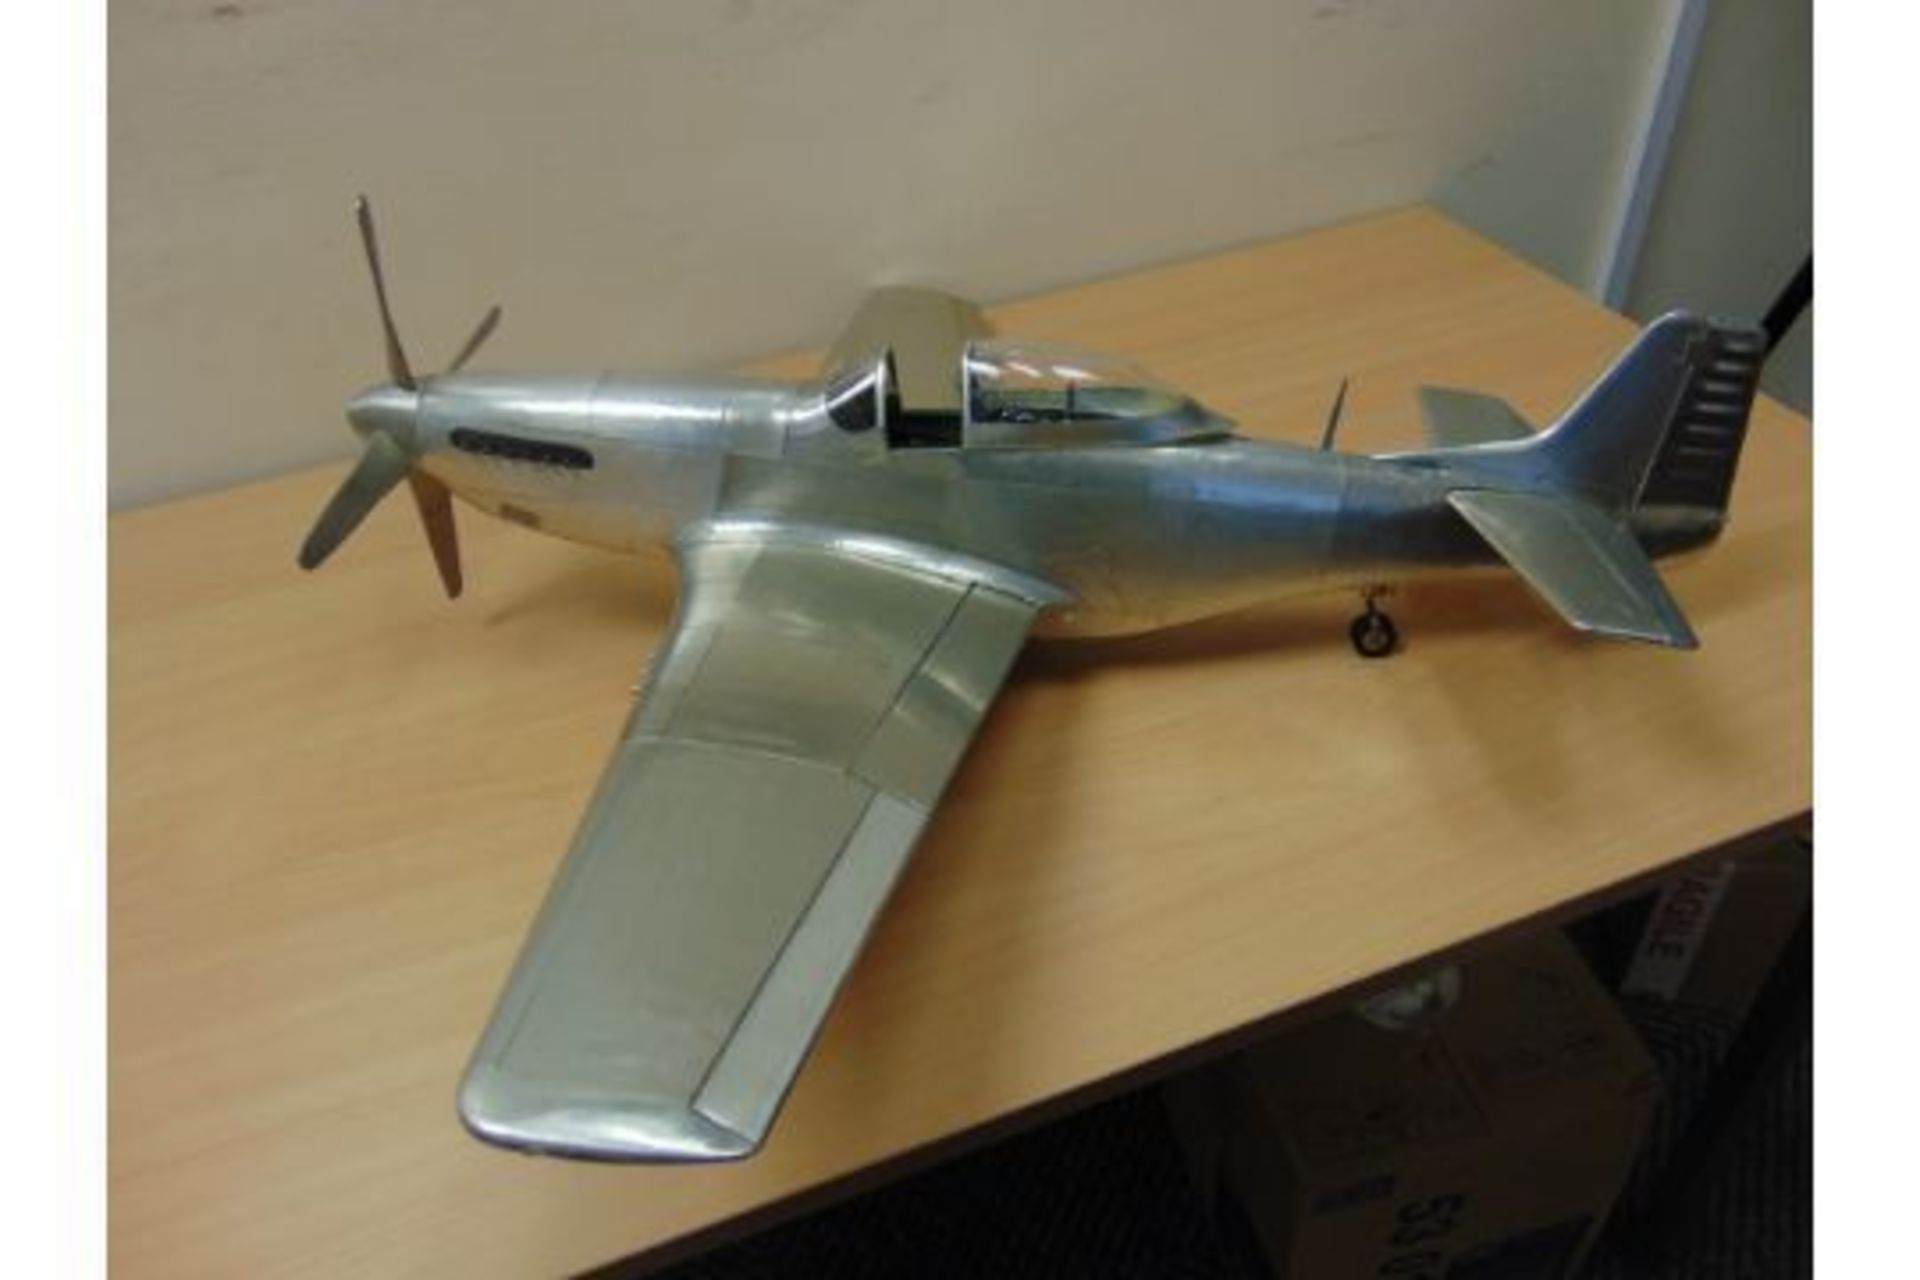 SUPERB DETAILED SCALE MODEL OF WW2 P51 MUSTANG IN POLISHED ALUMINIUM WITH RETACTABLE UNDERCARIAGE - Image 5 of 6